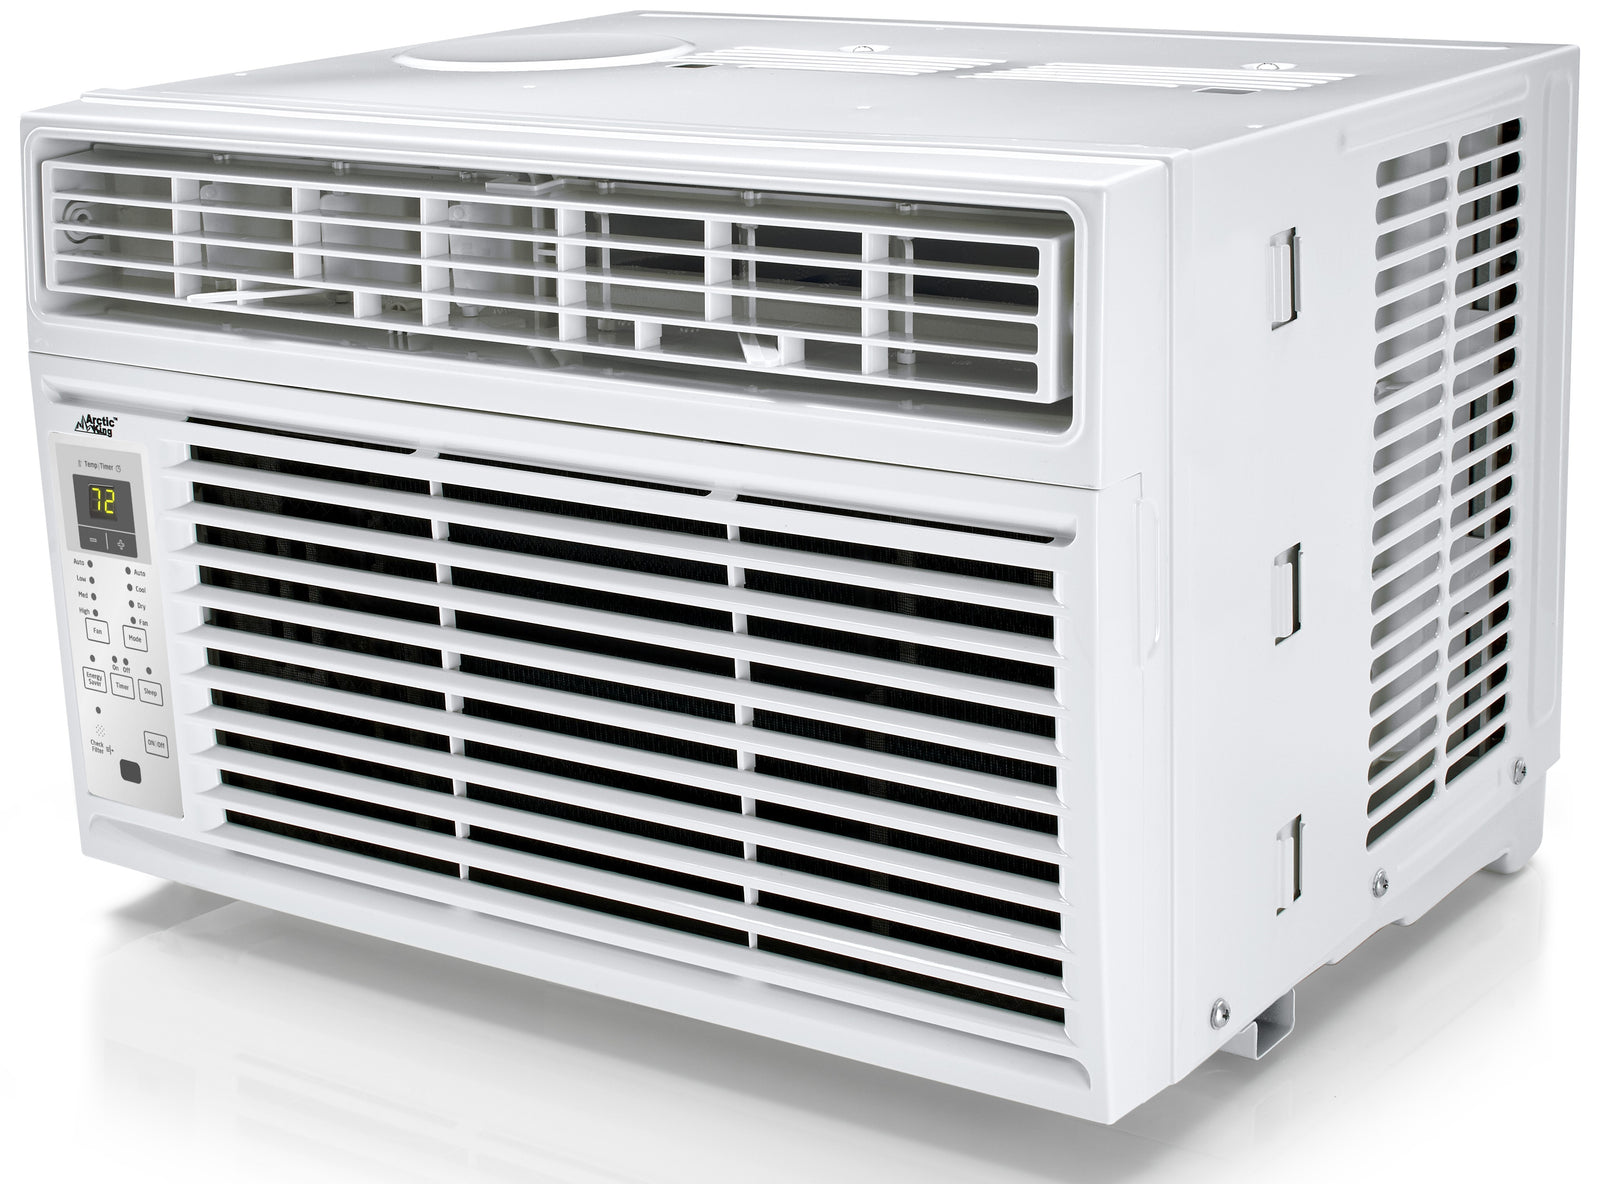  Arctic  King  6 000  BTU  115V Window Air  Conditioner  with 